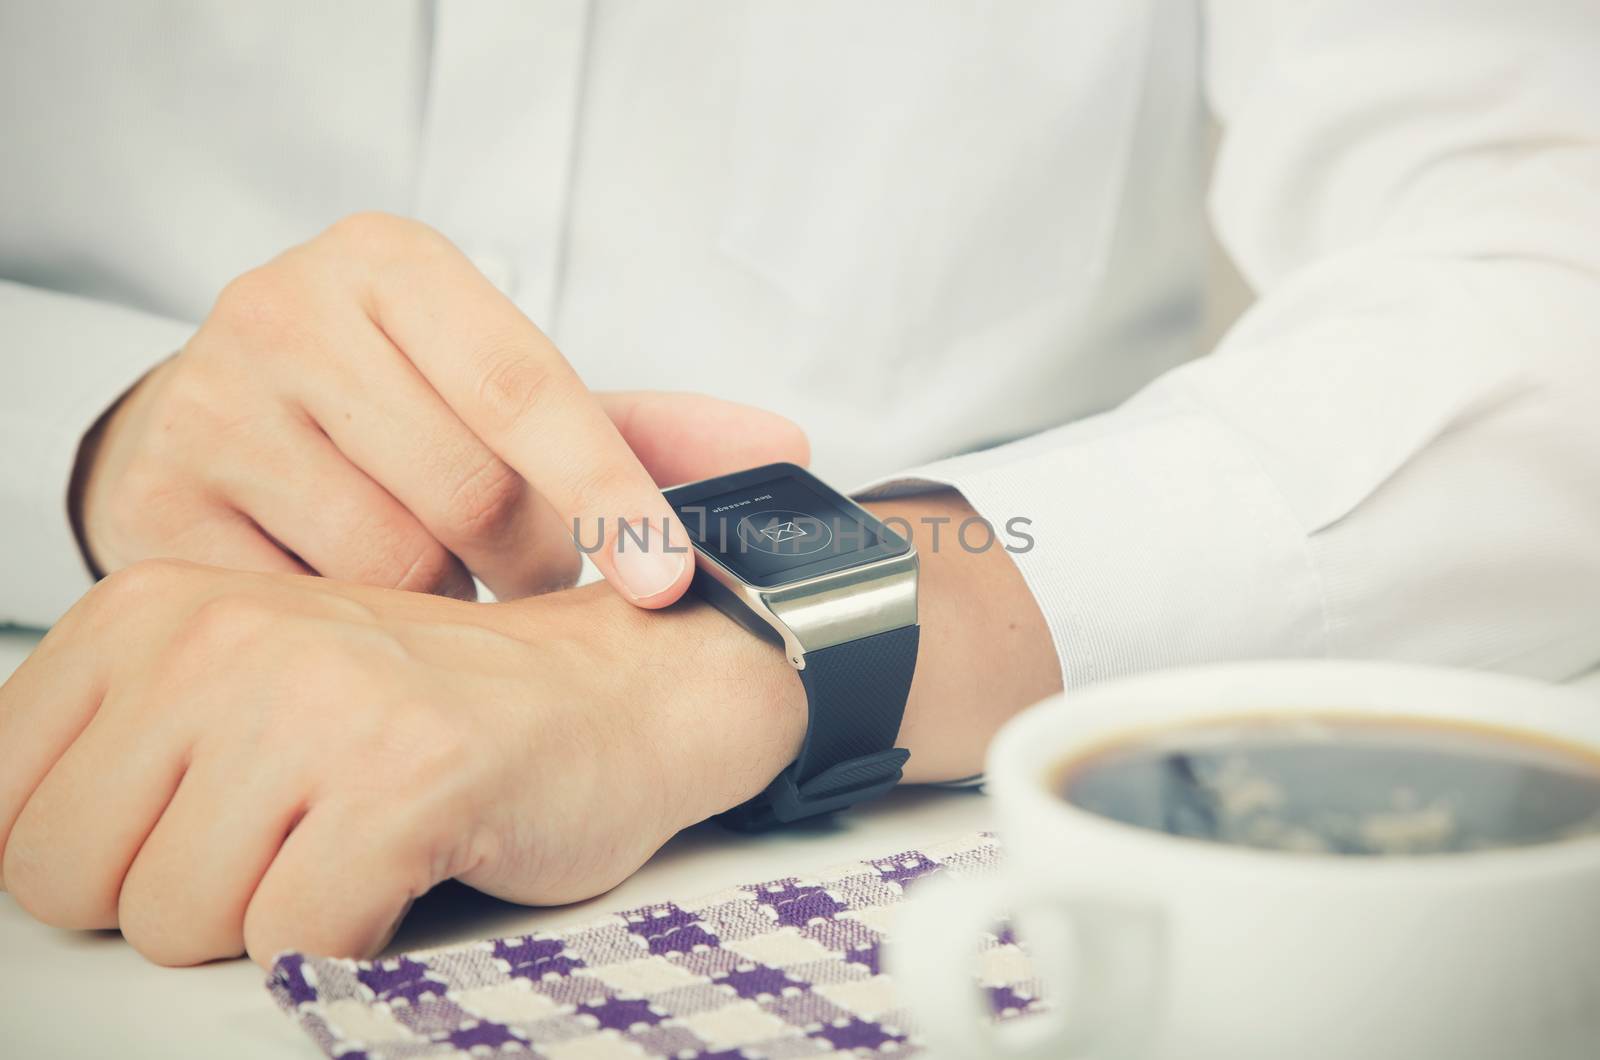 Businessman working with smart watch in restaurant. Coffee on the table 